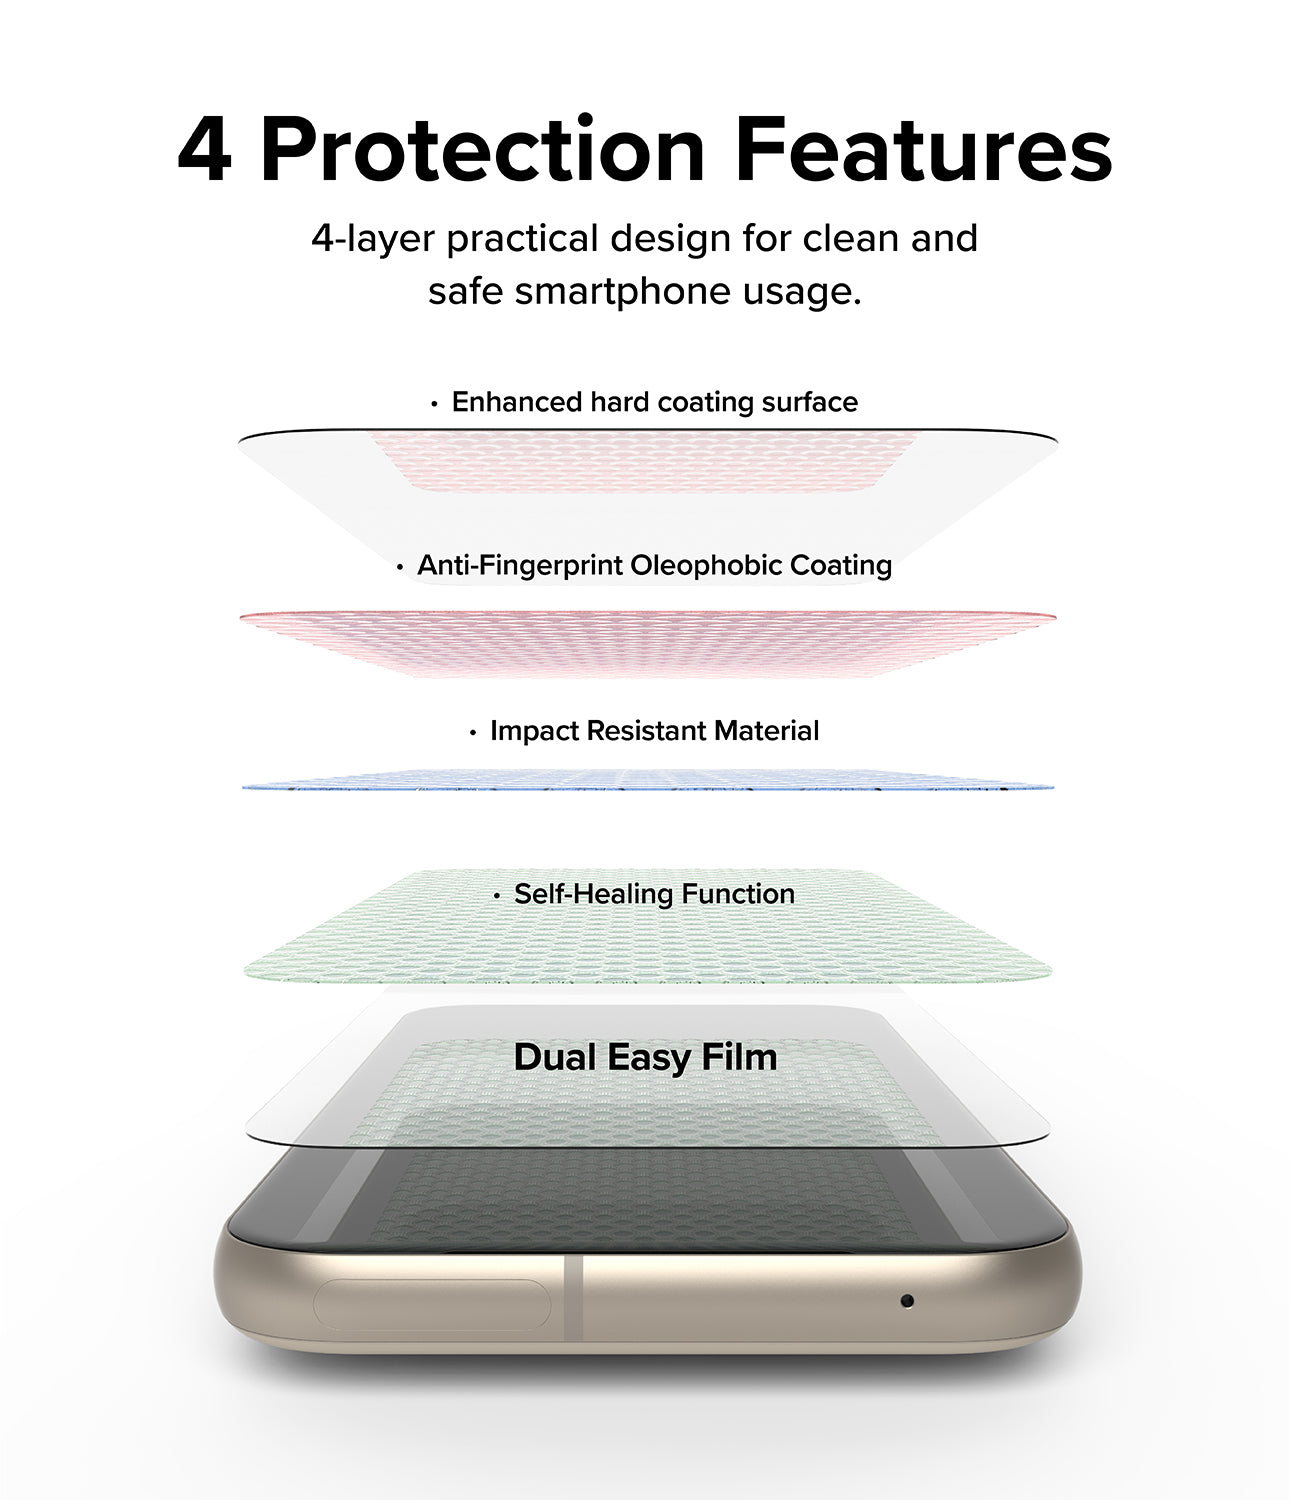 Google Pixel 8a Screen Protector | Dual Easy Film - 4 Protection Features. Enhanced hard coating surface. Anti-Fingerprint Oleophobic Coating. Impact Resistant Material. Self-Healing Function. Dual Easy Film